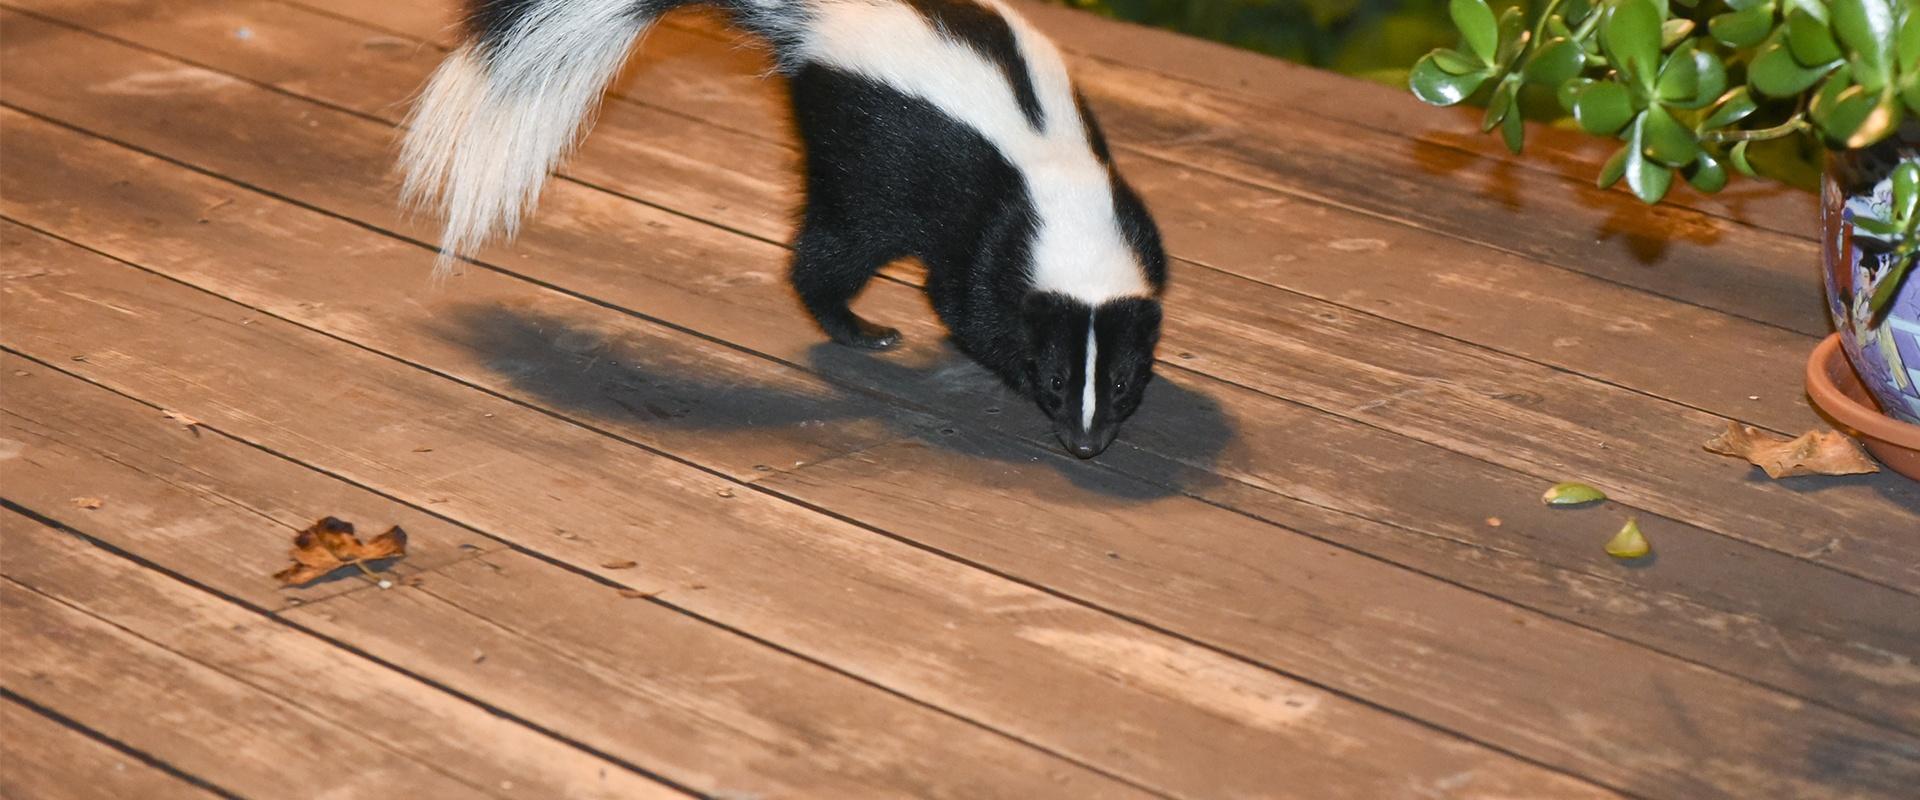 a skunk on a homes patio